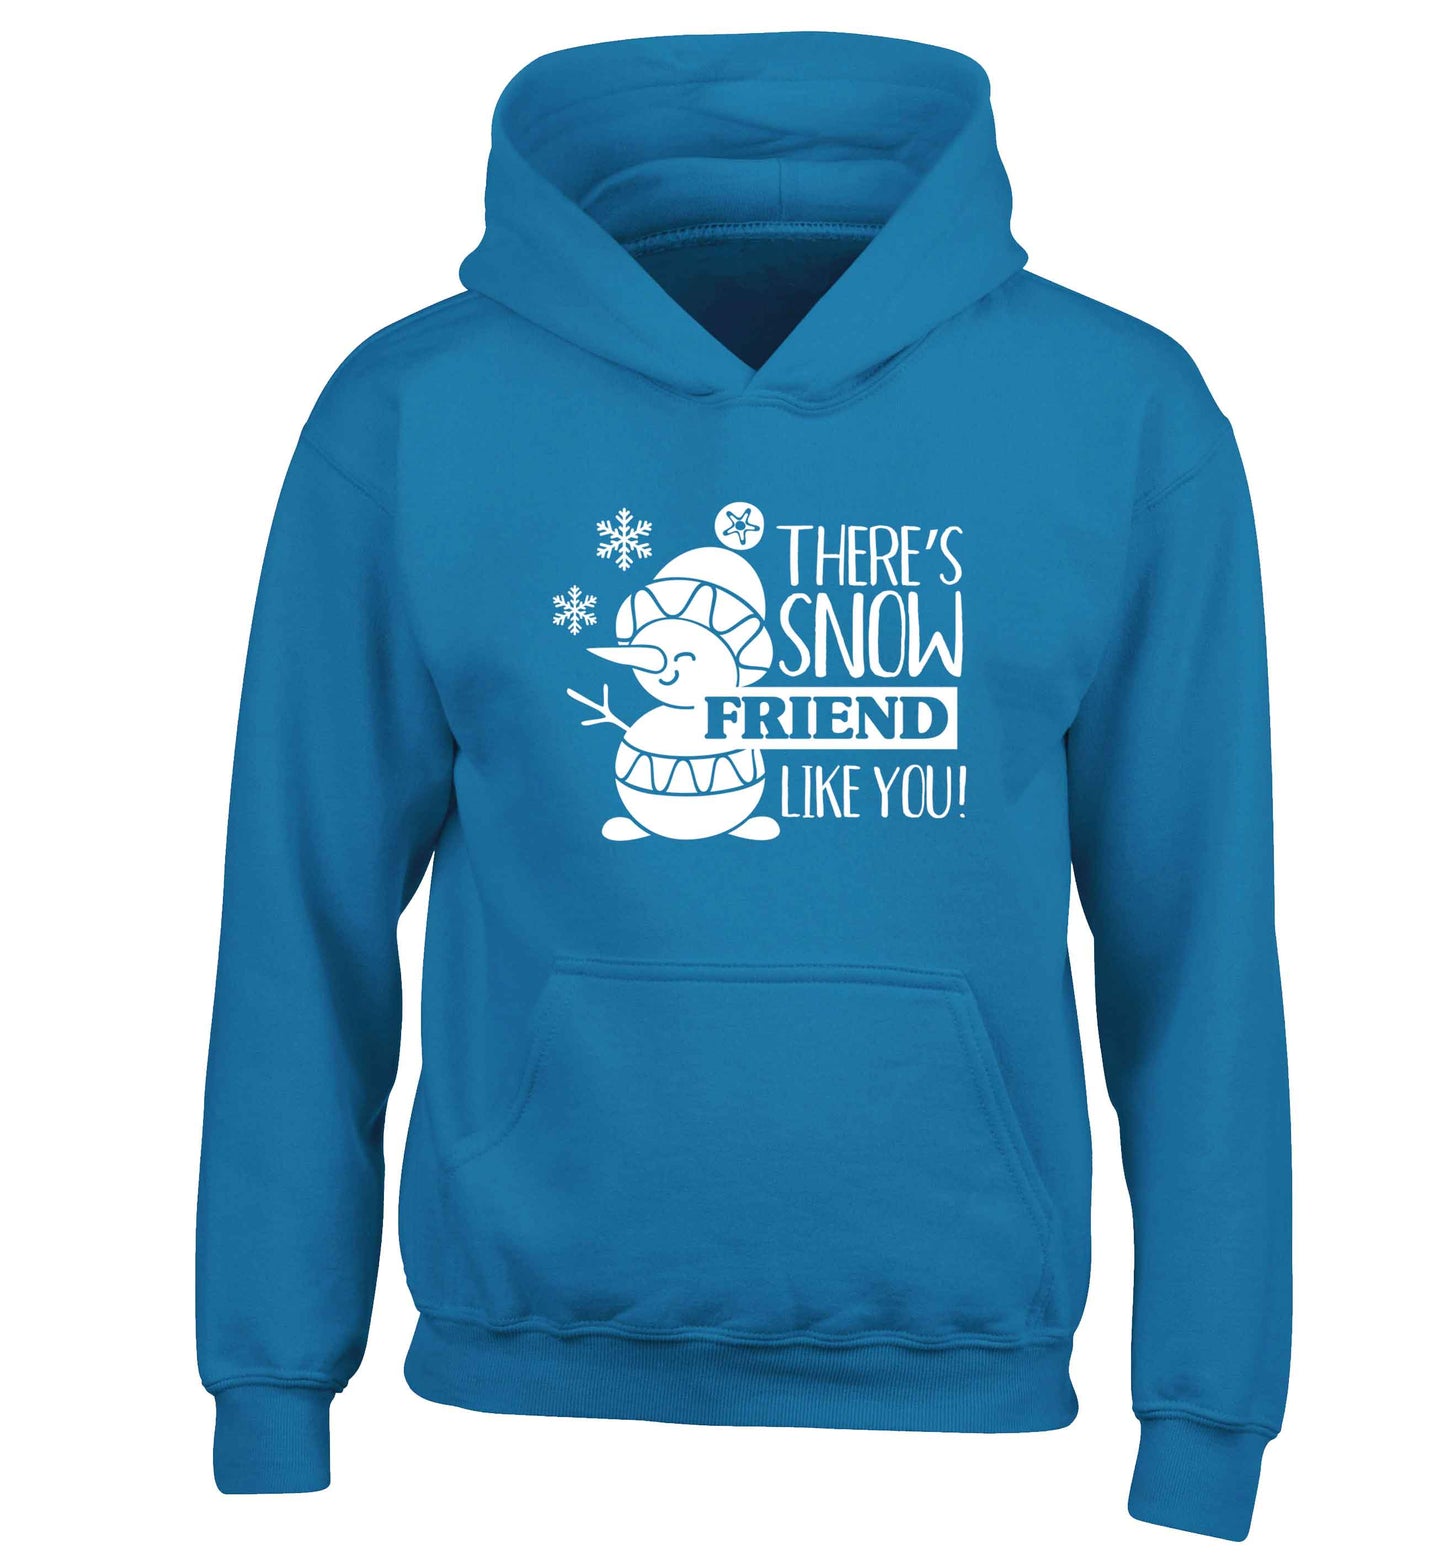 There's snow friend like you children's blue hoodie 12-13 Years